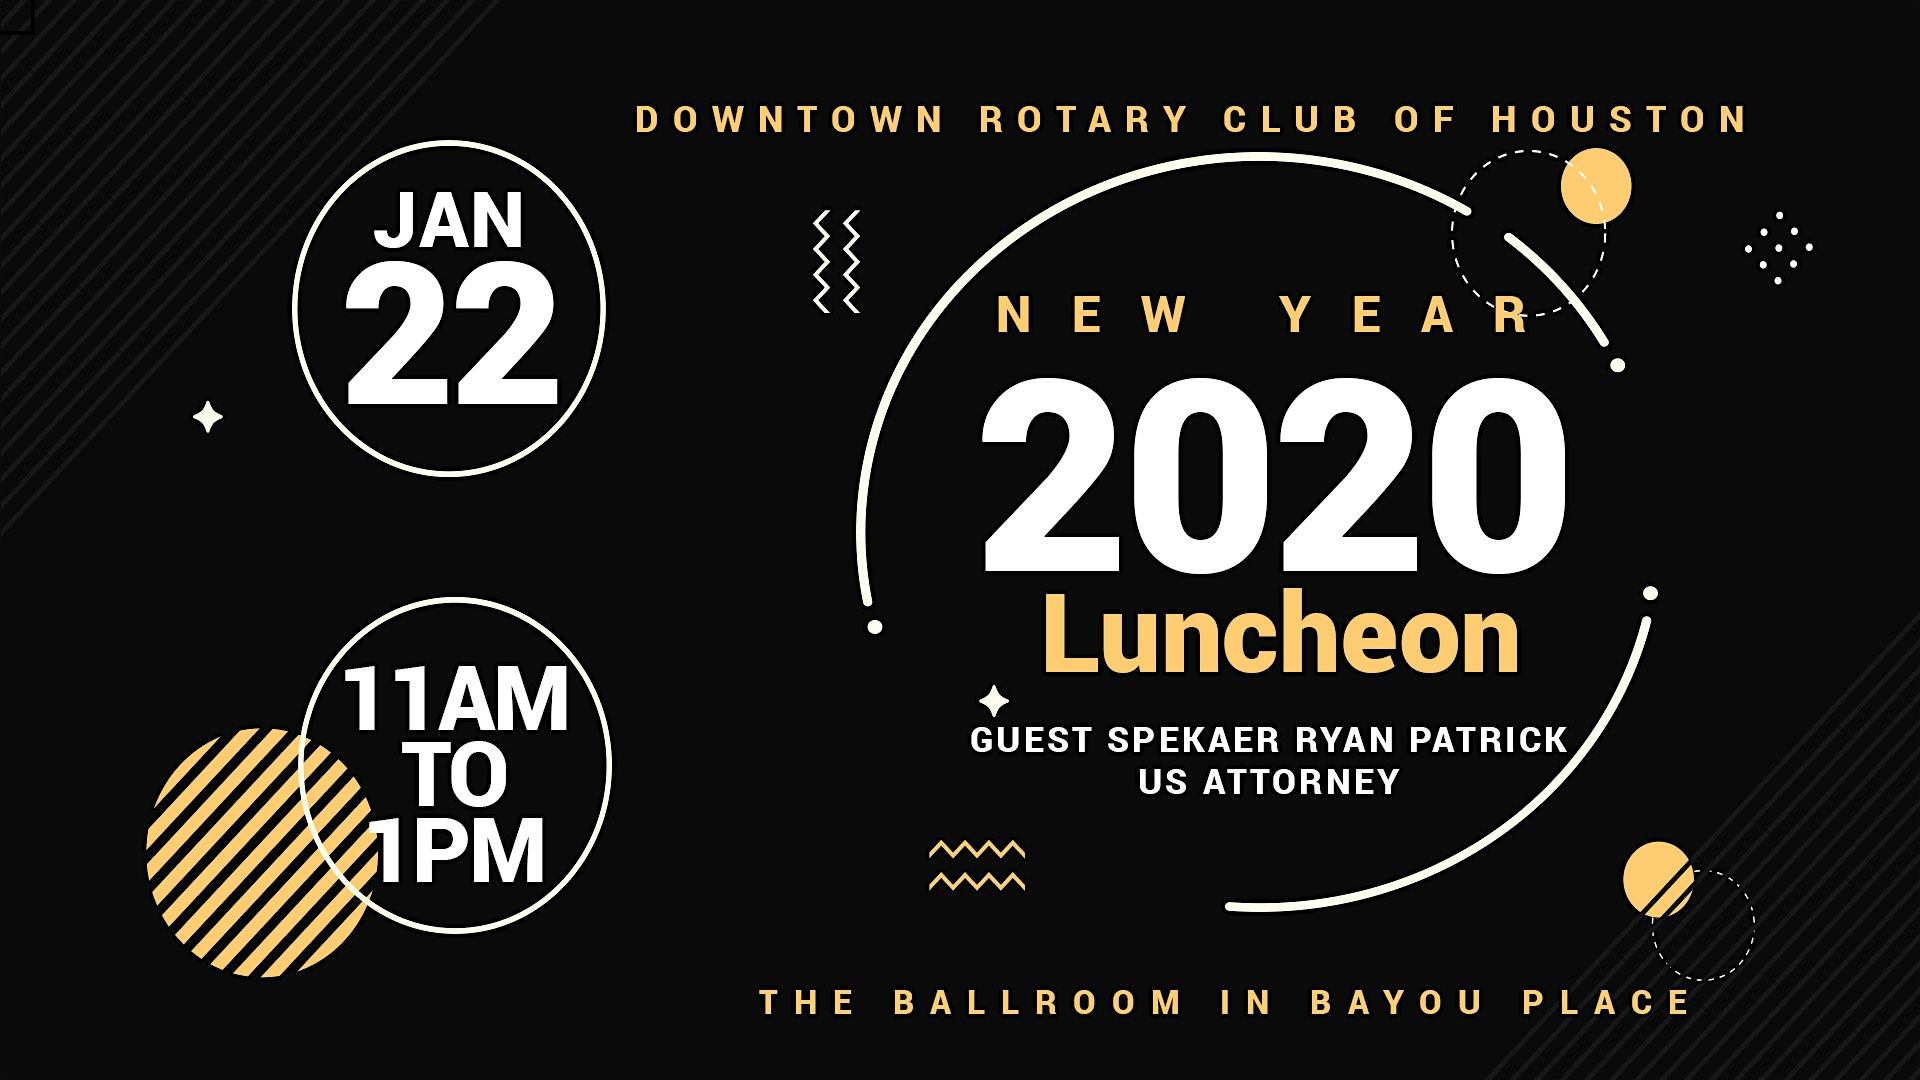 DOWNTOWN ROTARY NEW YEAR LUNCHEON WITH SPEAKER RYAN PATRICK, US ATTORNEY